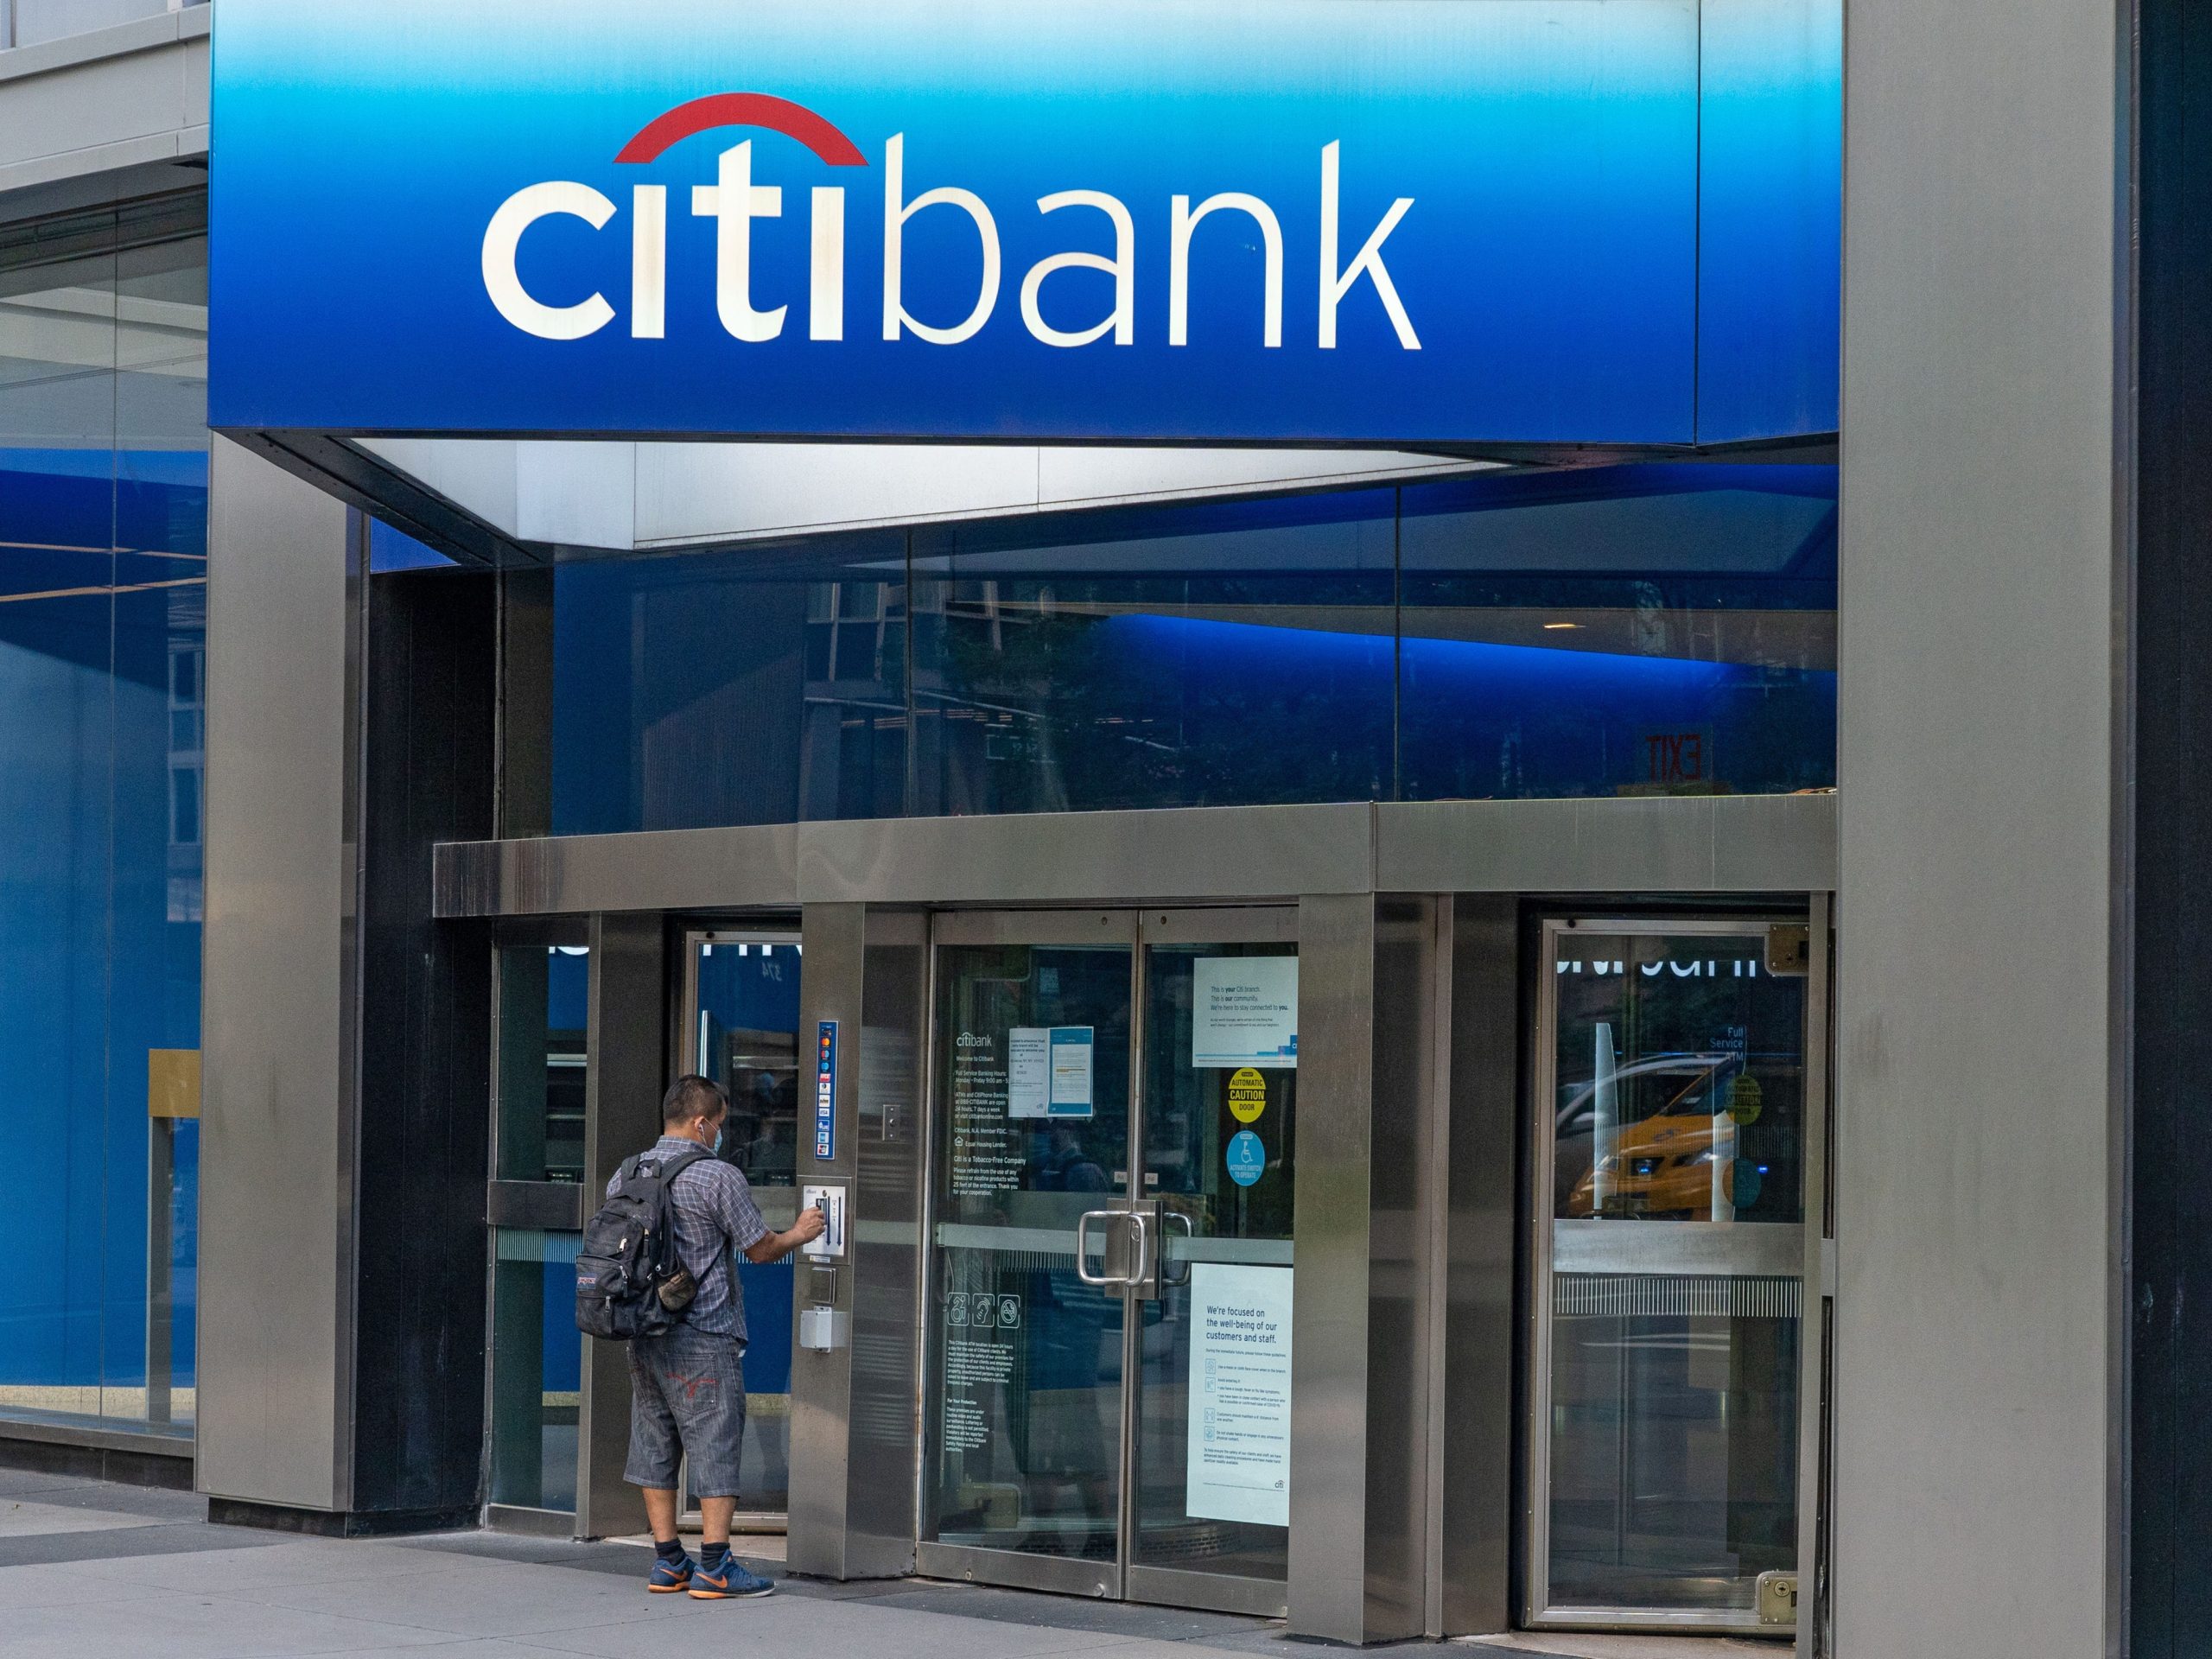 A man enters a Citibank branch of Citigroup in New York City. Profit plummeted at the bank because of COVID-19 pandemic